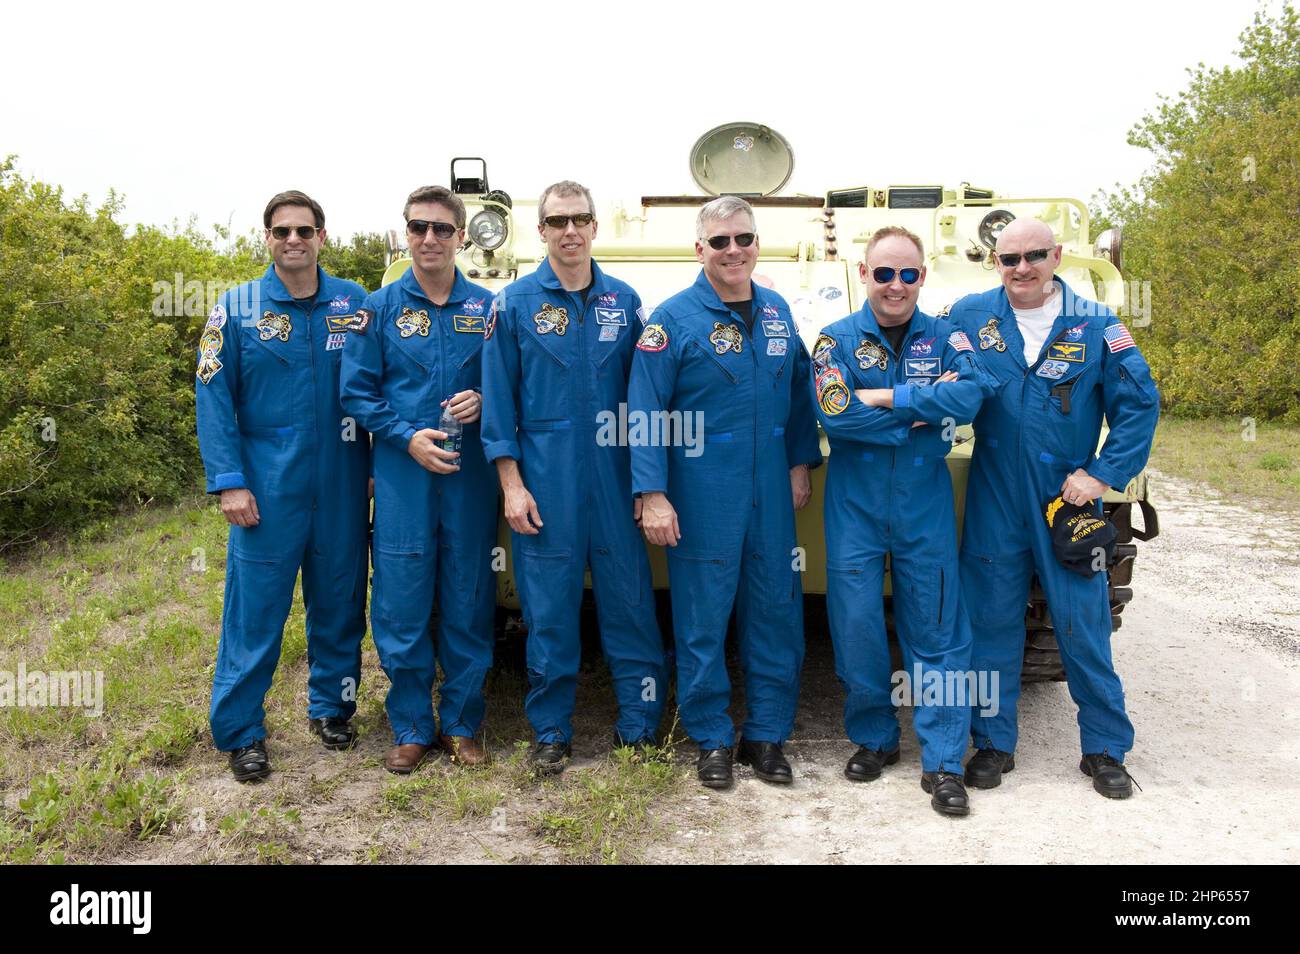 Space shuttle Endeavour's STS-134 crew members pose for a group photo in front of an M113 armored personnel carrier at NASA's Kennedy Space Center in Florida. An M113 is kept at the foot of the launch pad in case an emergency exit from the pad is needed and every shuttle crew is trained on driving the vehicle before launch. From left, are Mission Specialists Greg Chamitoff, European Space Agency astronaut Roberto Vittori and Andrew Feustel, Pilot Greg H. Johnson, Mission Specialist Michael Fincke, and Commander Mark Kelly ca. 2011 Stock Photo